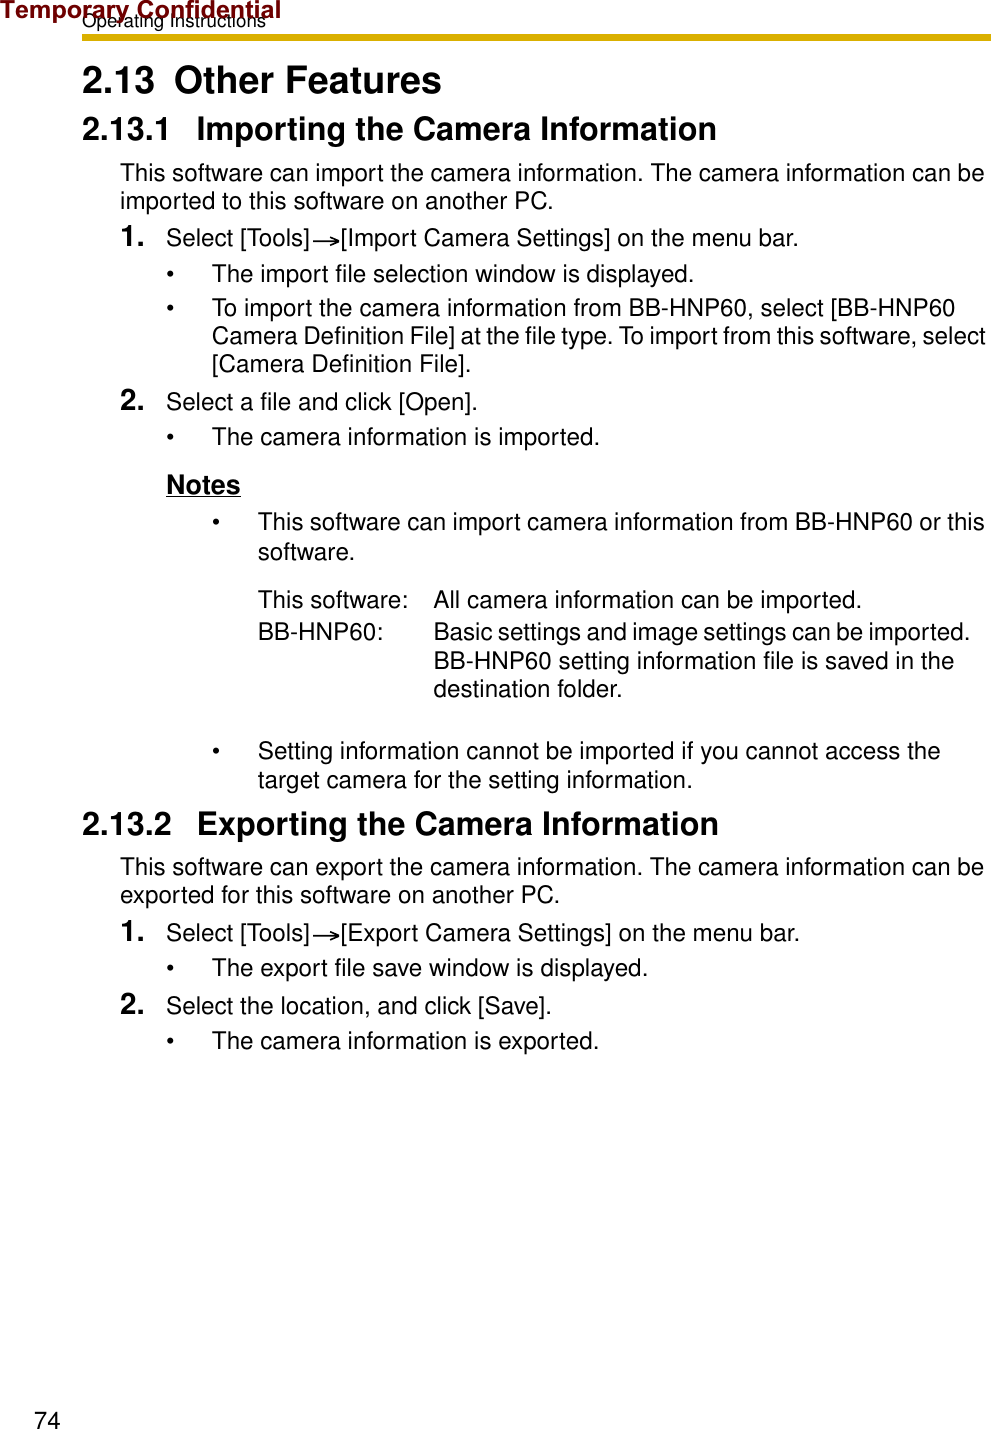 Operating Instructions742.13 Other Features2.13.1 Importing the Camera InformationThis software can import the camera information. The camera information can be imported to this software on another PC.1. Select [Tools] [Import Camera Settings] on the menu bar.• The import file selection window is displayed.• To import the camera information from BB-HNP60, select [BB-HNP60 Camera Definition File] at the file type. To import from this software, select [Camera Definition File].2. Select a file and click [Open].• The camera information is imported.Notes• This software can import camera information from BB-HNP60 or this software.• Setting information cannot be imported if you cannot access the target camera for the setting information.2.13.2 Exporting the Camera InformationThis software can export the camera information. The camera information can be exported for this software on another PC.1. Select [Tools] [Export Camera Settings] on the menu bar.• The export file save window is displayed.2. Select the location, and click [Save].• The camera information is exported.This software: All camera information can be imported.BB-HNP60: Basic settings and image settings can be imported. BB-HNP60 setting information file is saved in the destination folder.Temporary Confidential